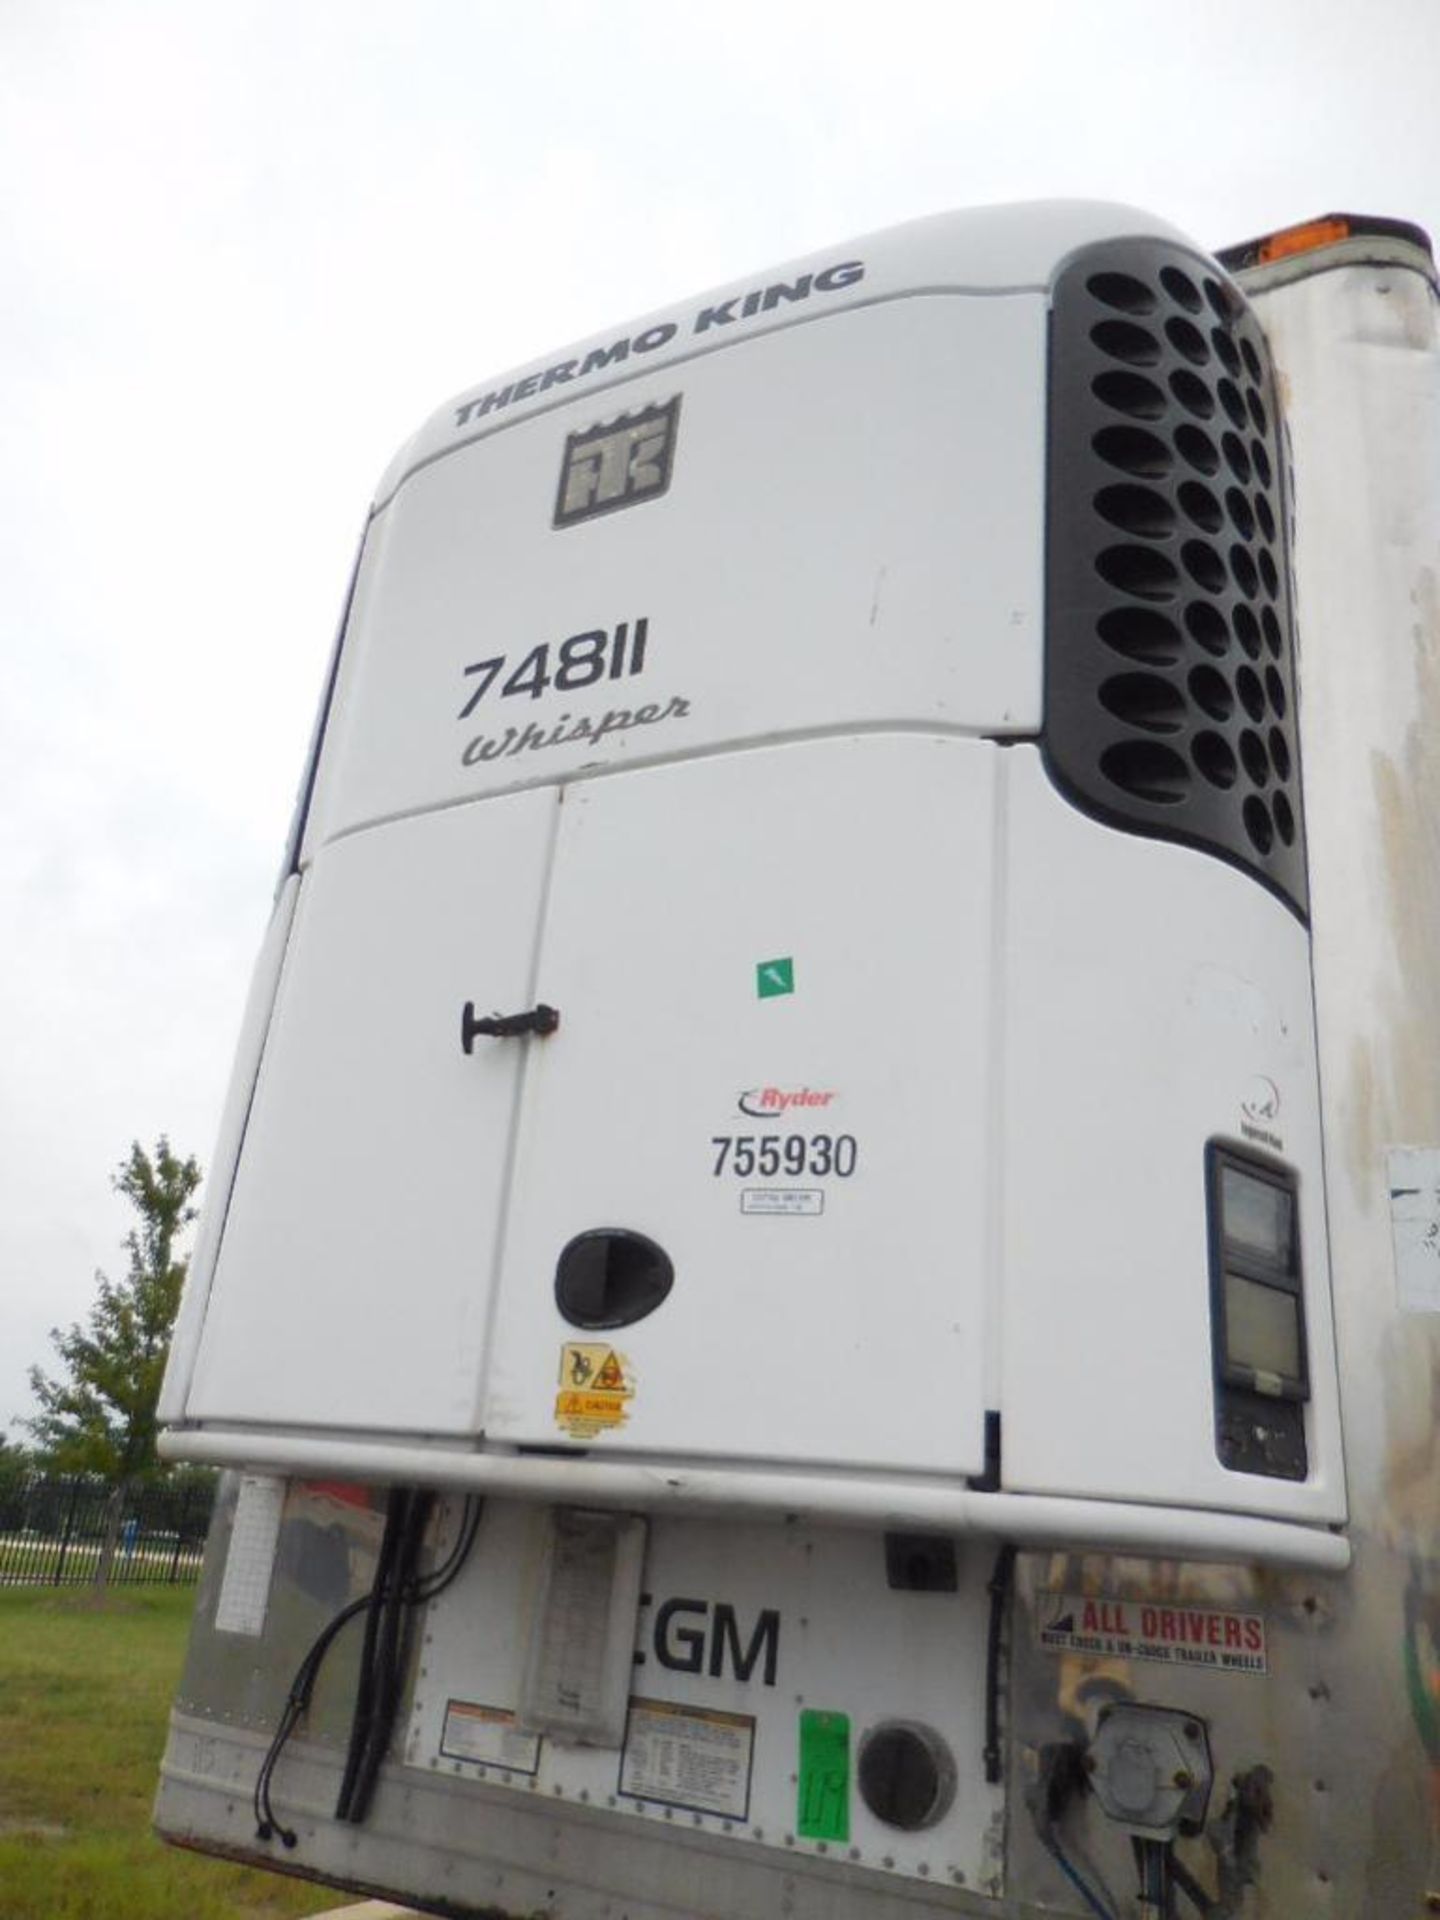 2004 Great Dane 48' Refrigerated Trailer, VIN # 1GRAA96275B703742, Unit 74811 - Image 17 of 22